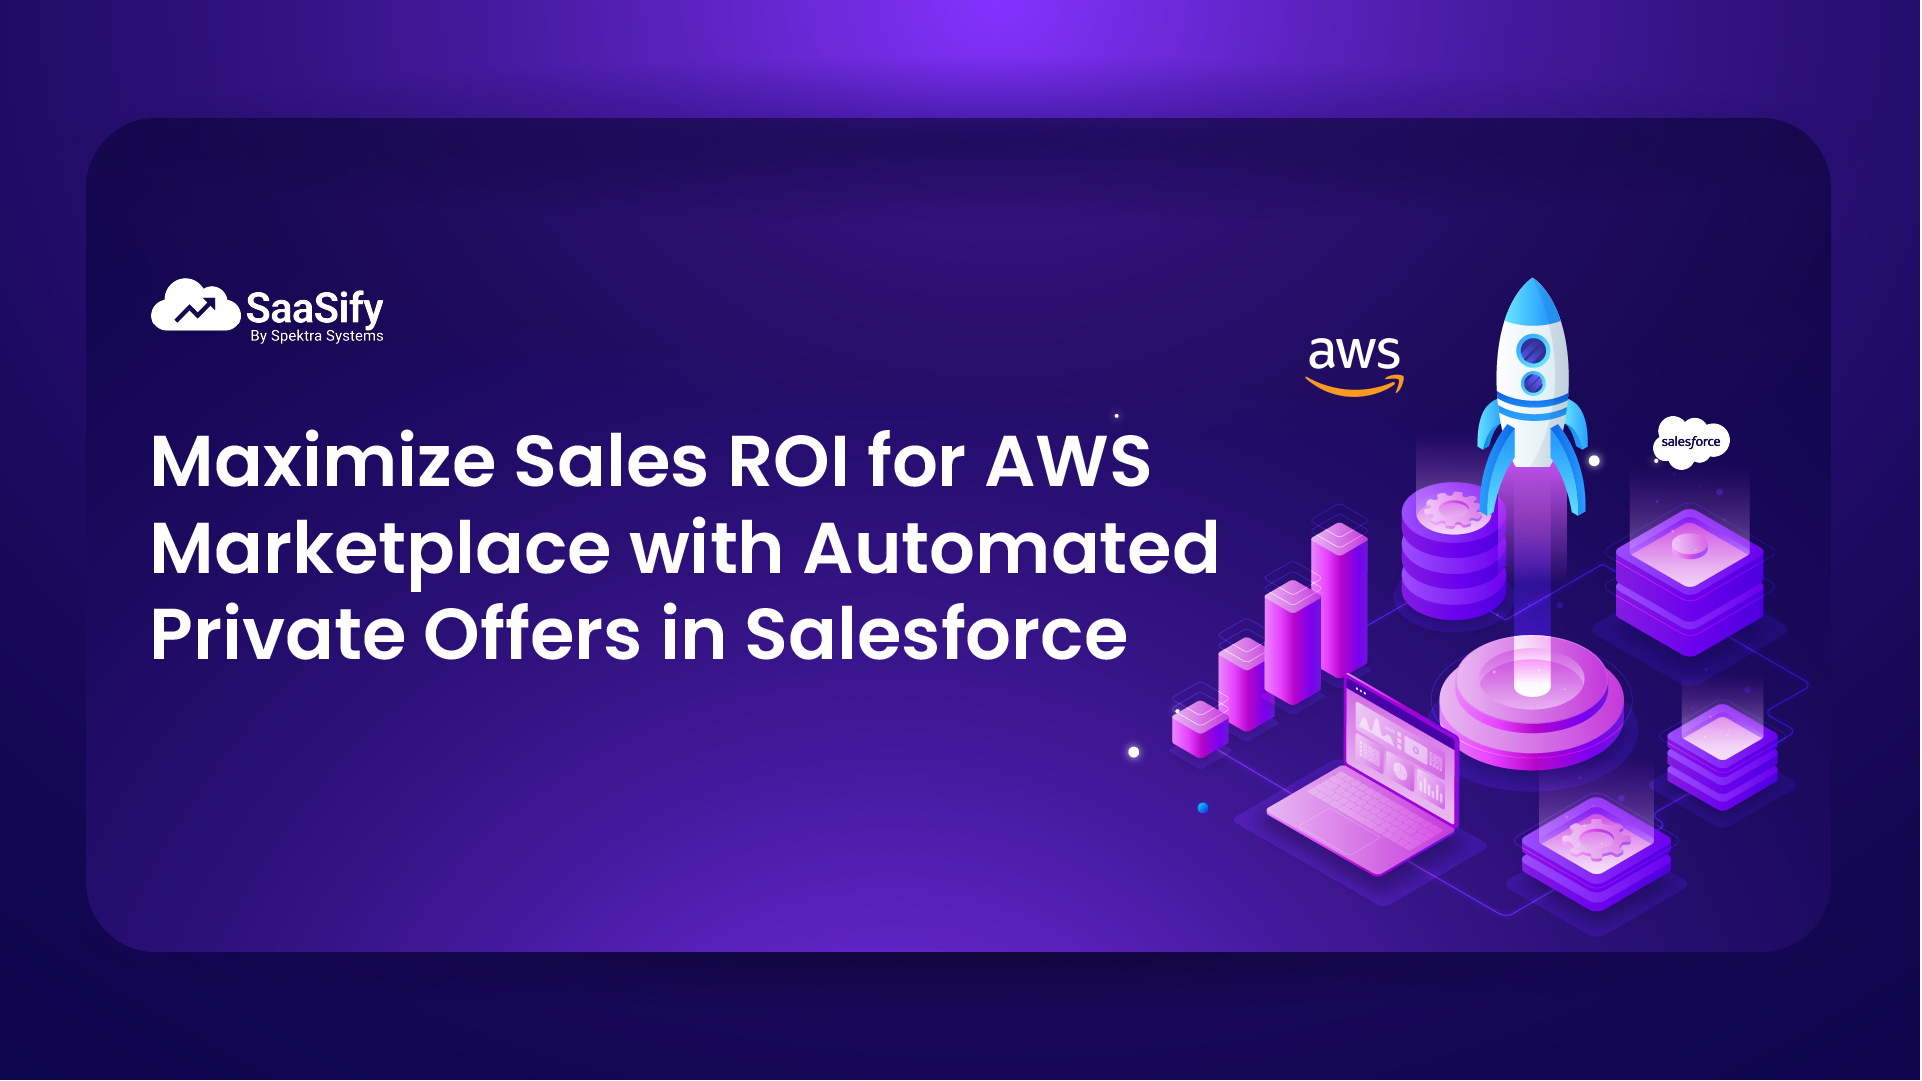 Maximizing Sales ROI: The Business Impact of AWS Private Offer Lifecycle Automation through Salesforce